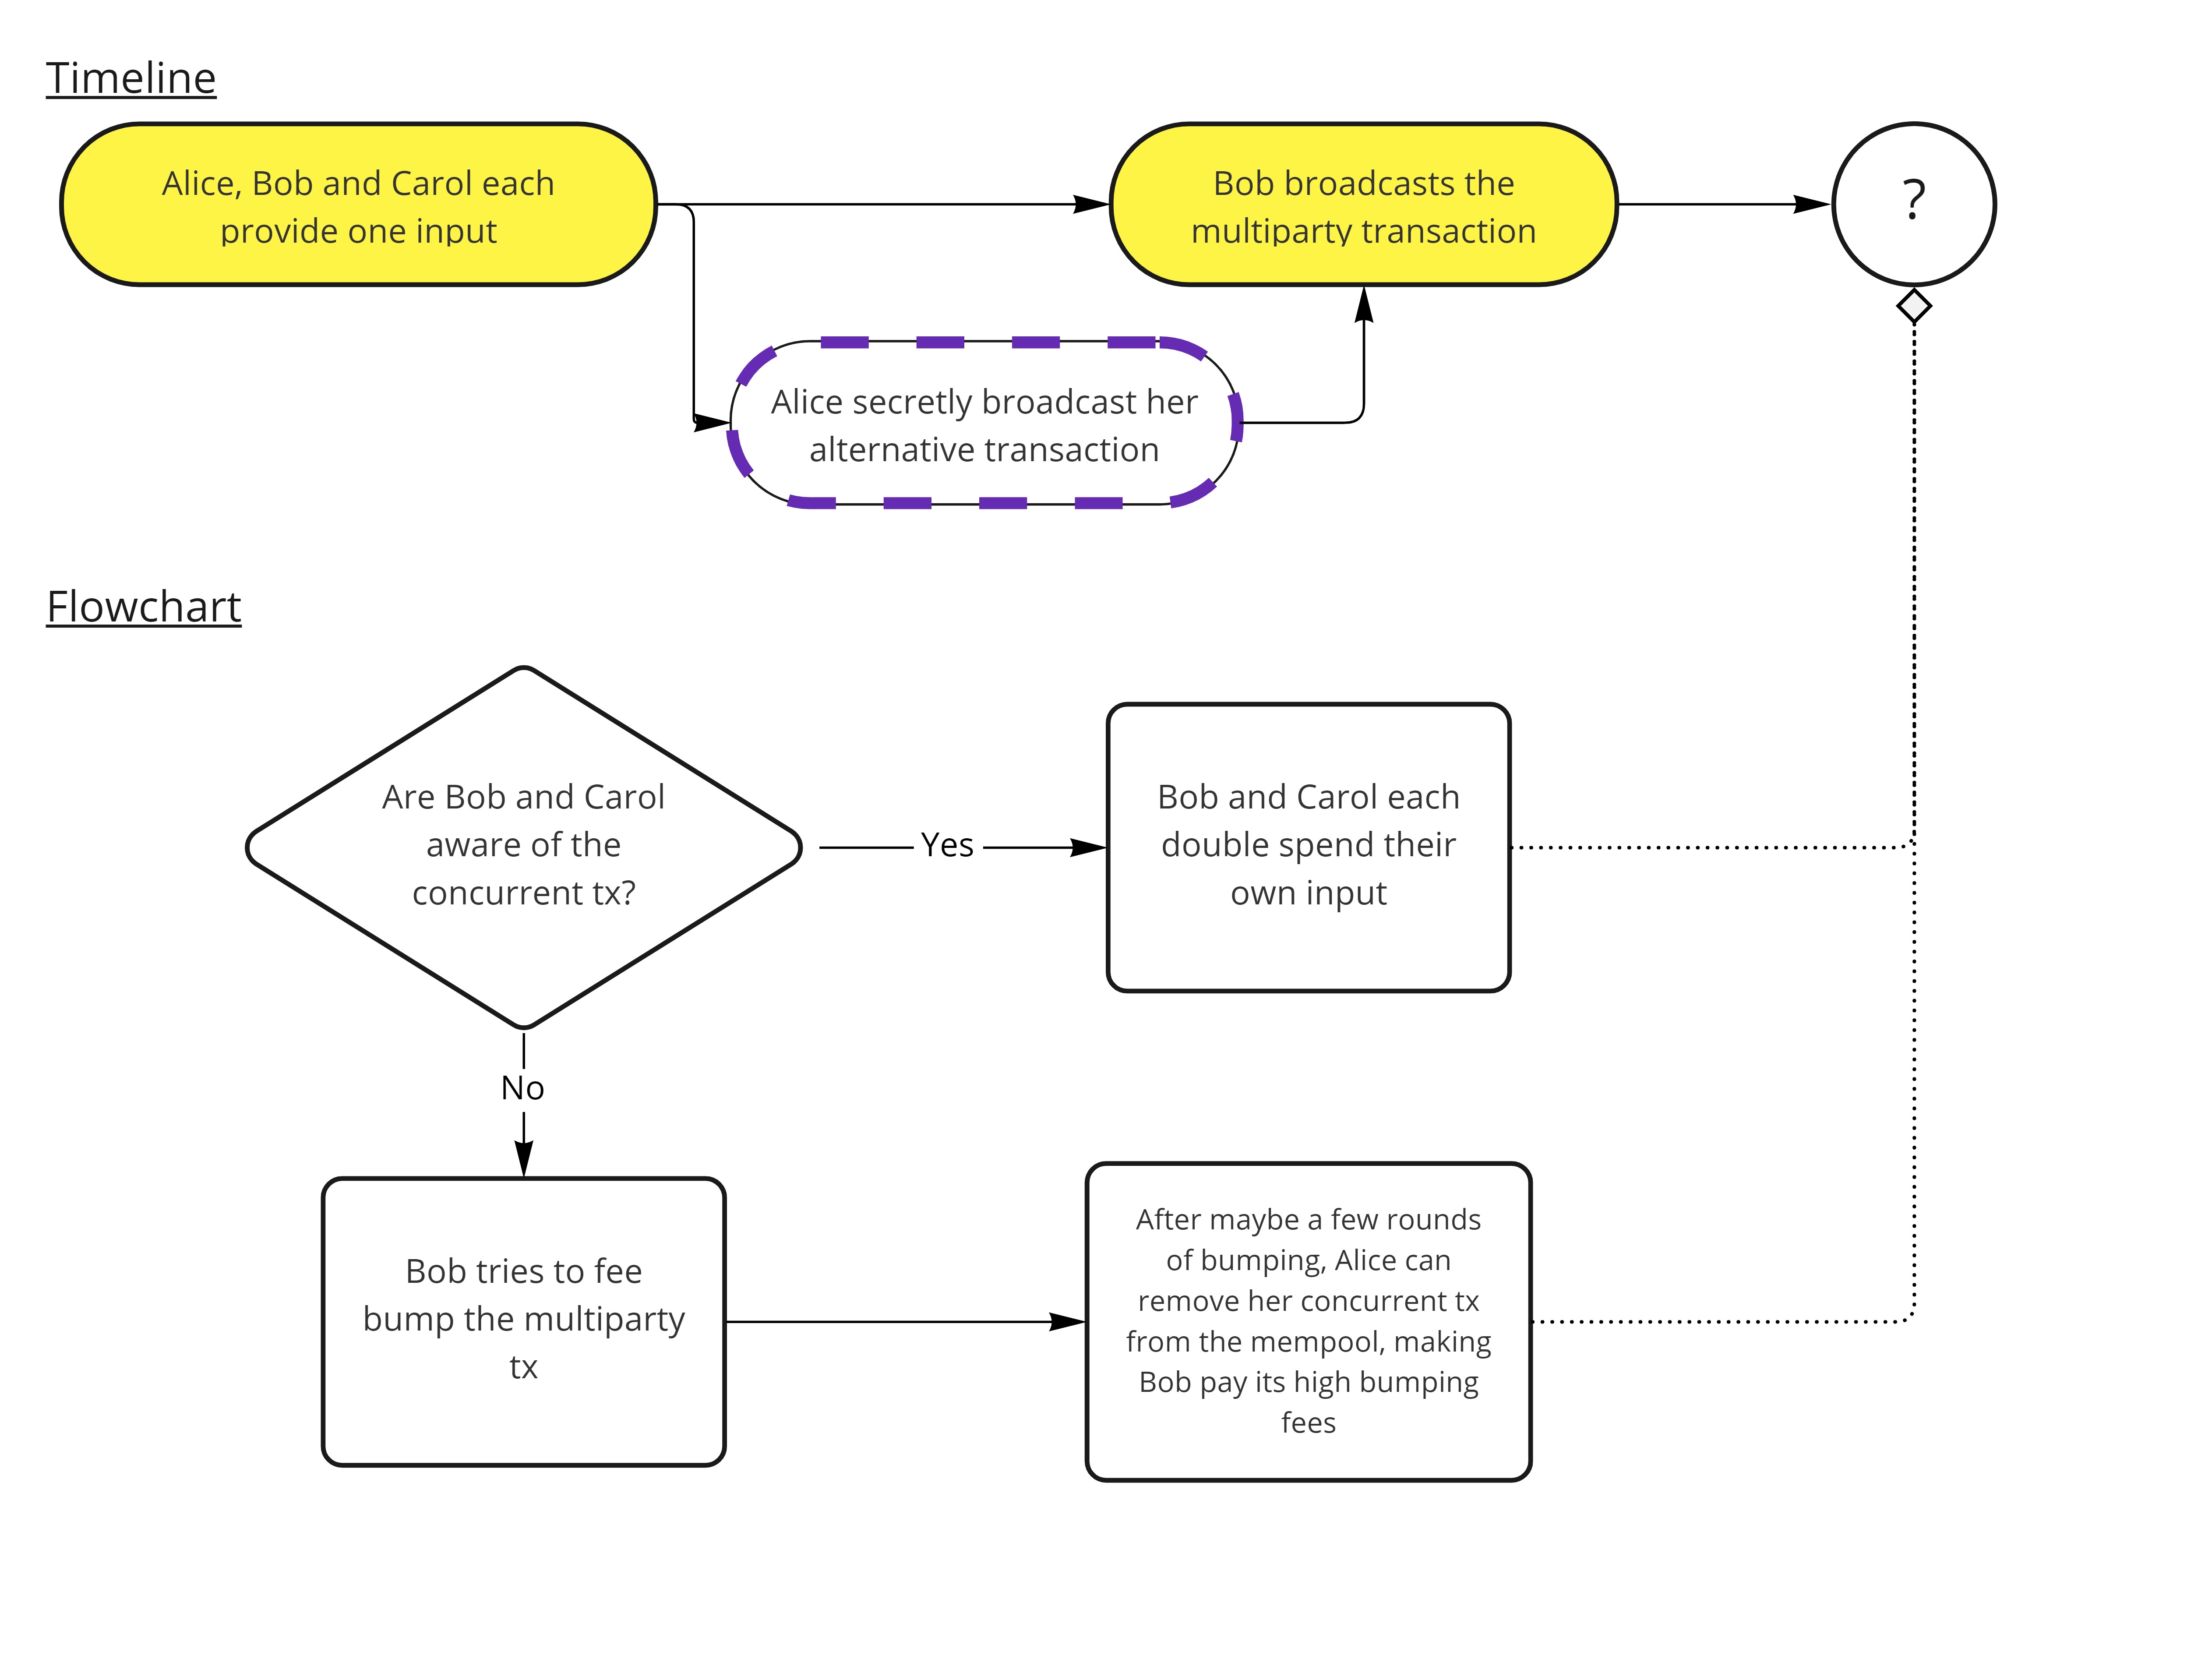 The timeline of the attack and the decision flow graph for Bob and Carol